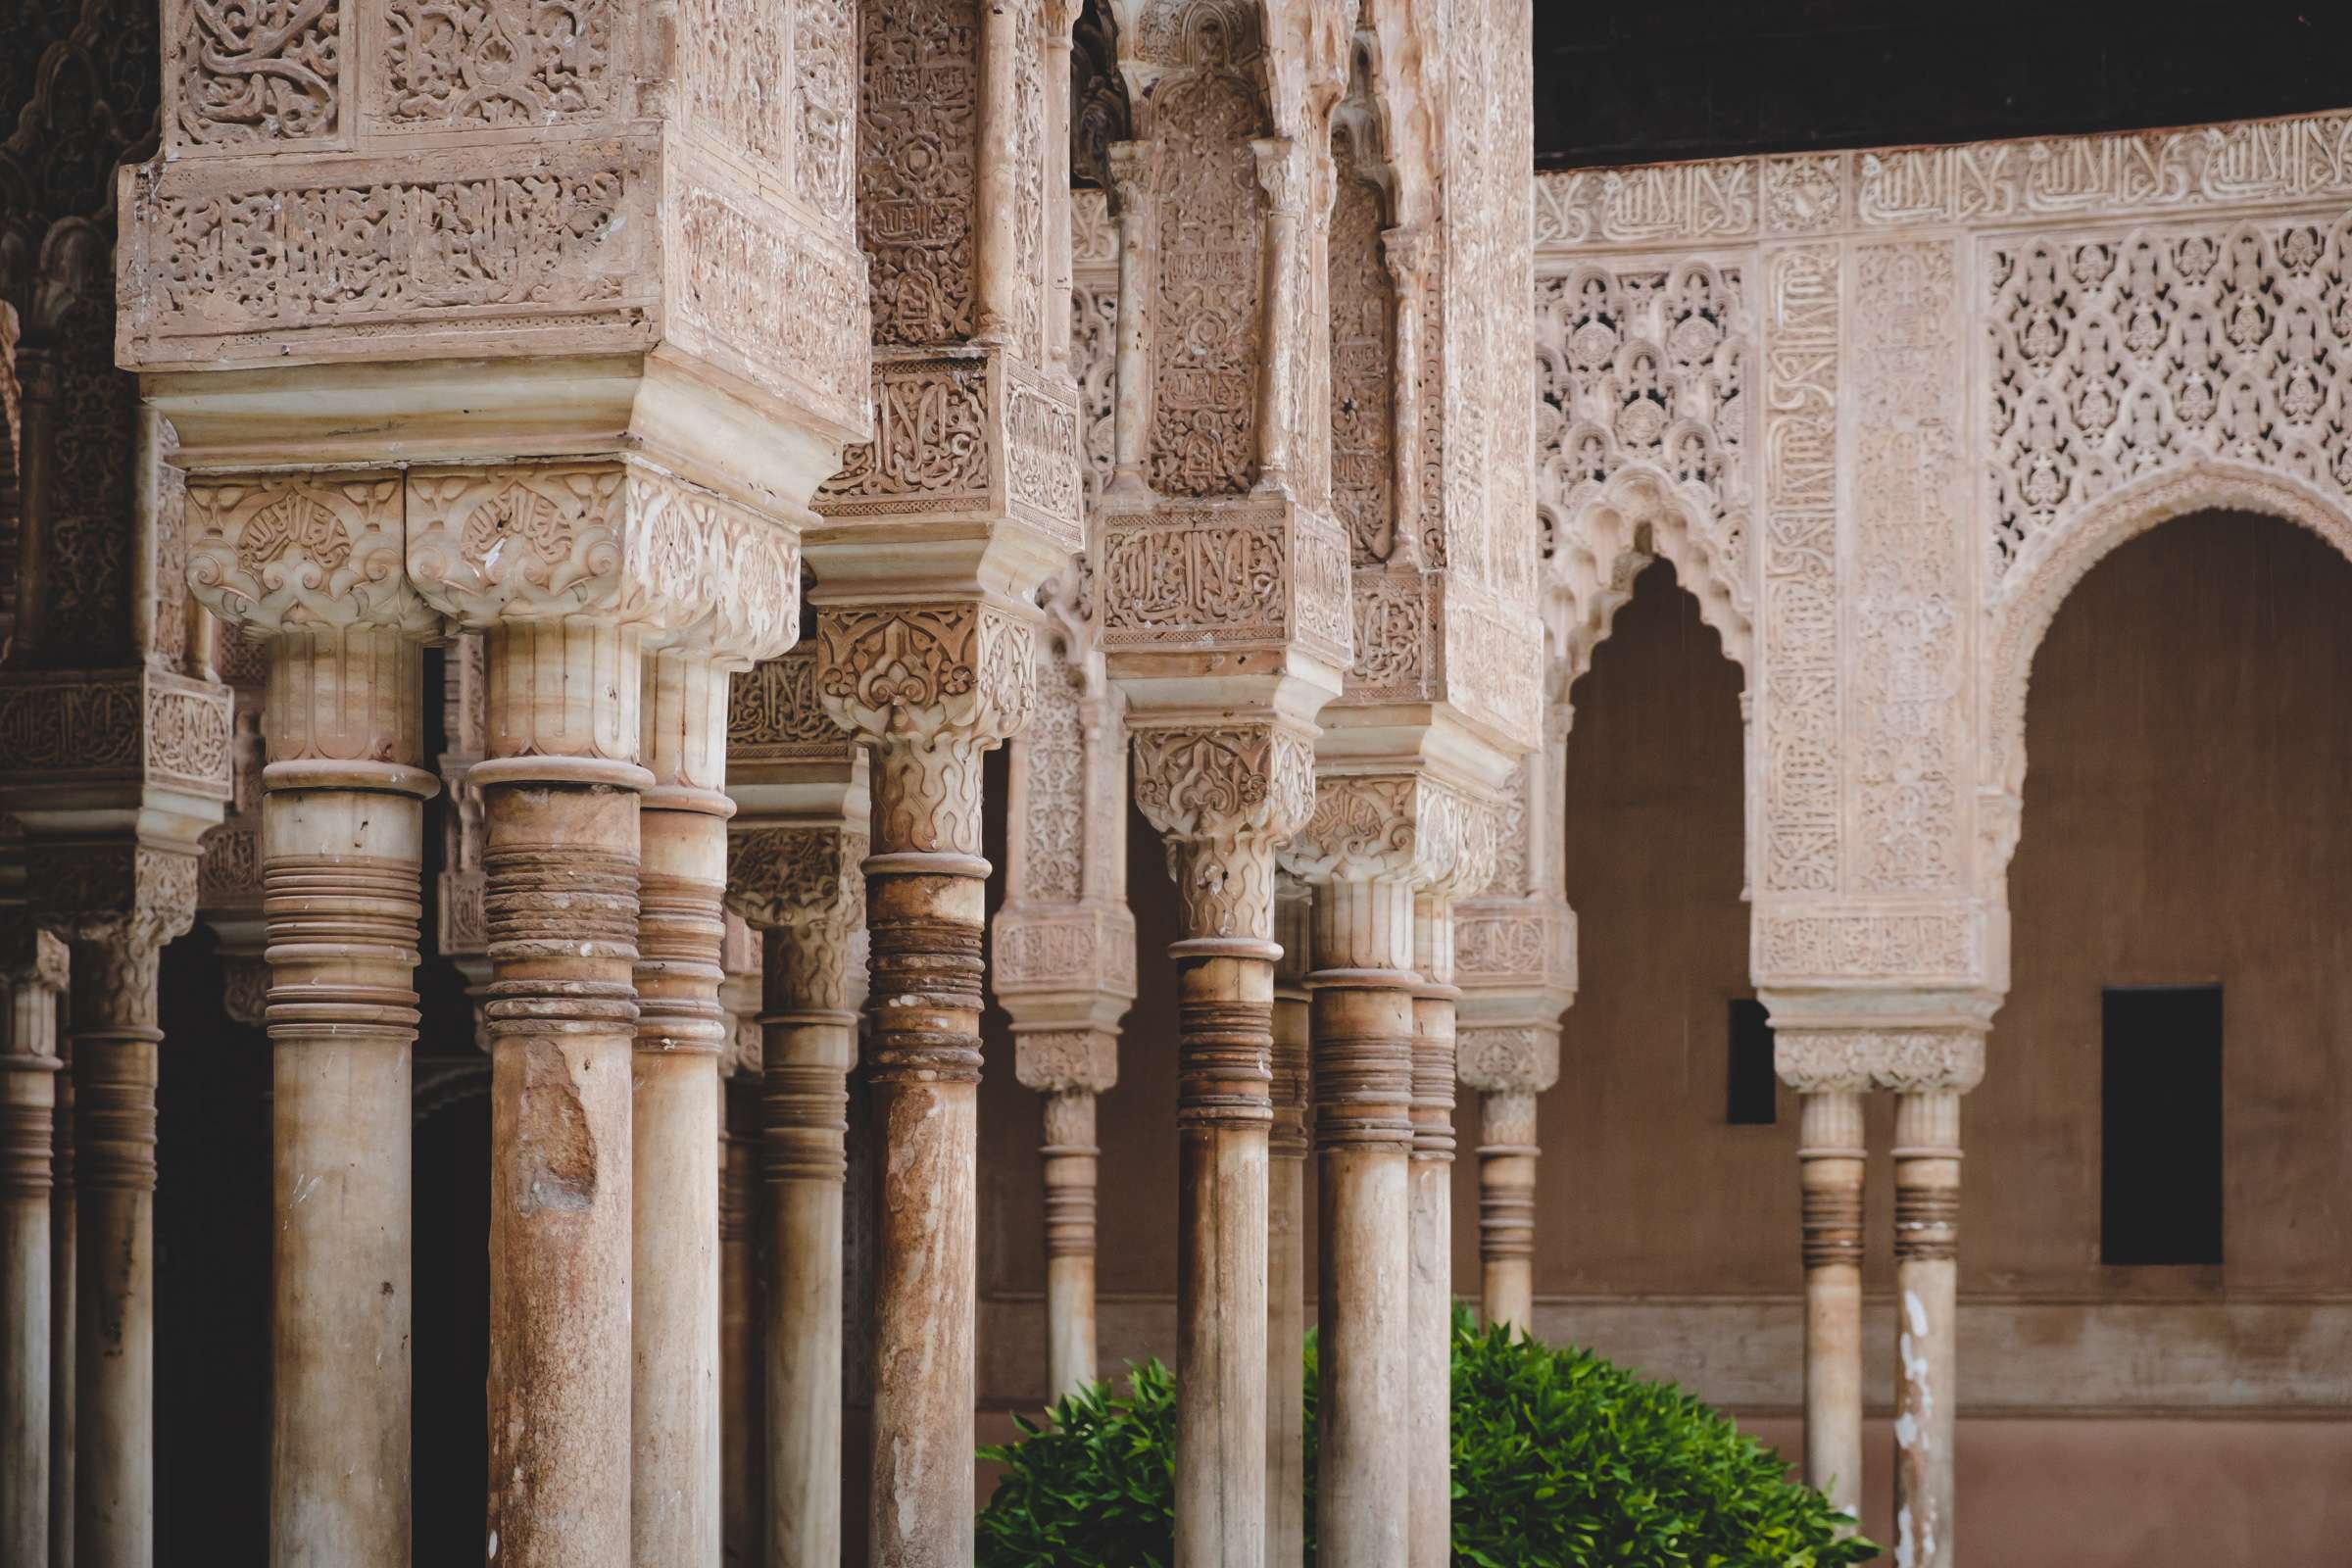 Intricately carved arches and columns, The Alhambra, Granada